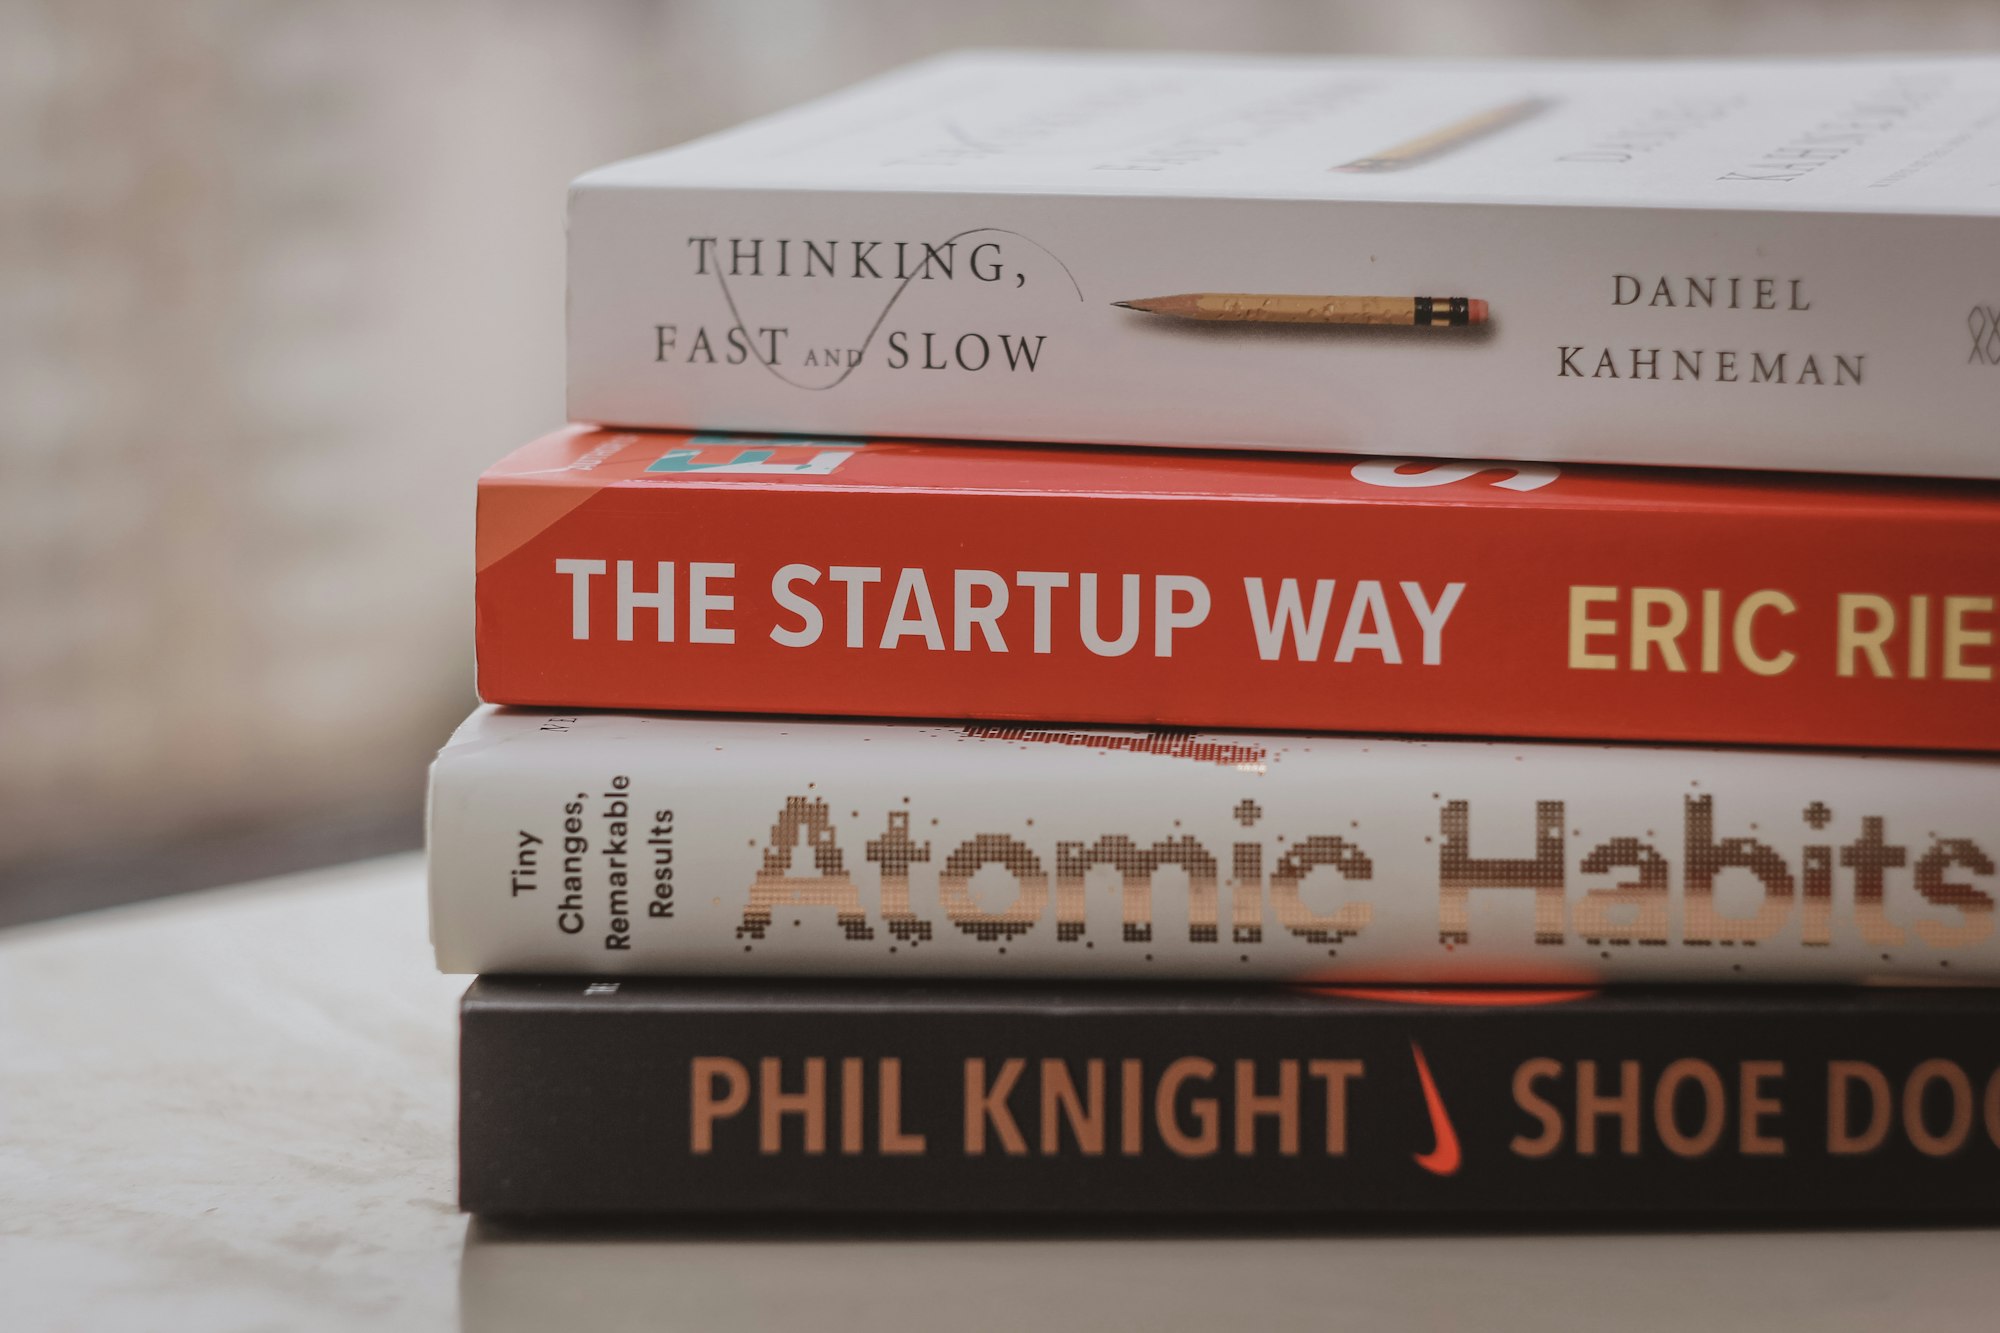 Lesson #1: Building a successful product is only the beginning of your startup journey